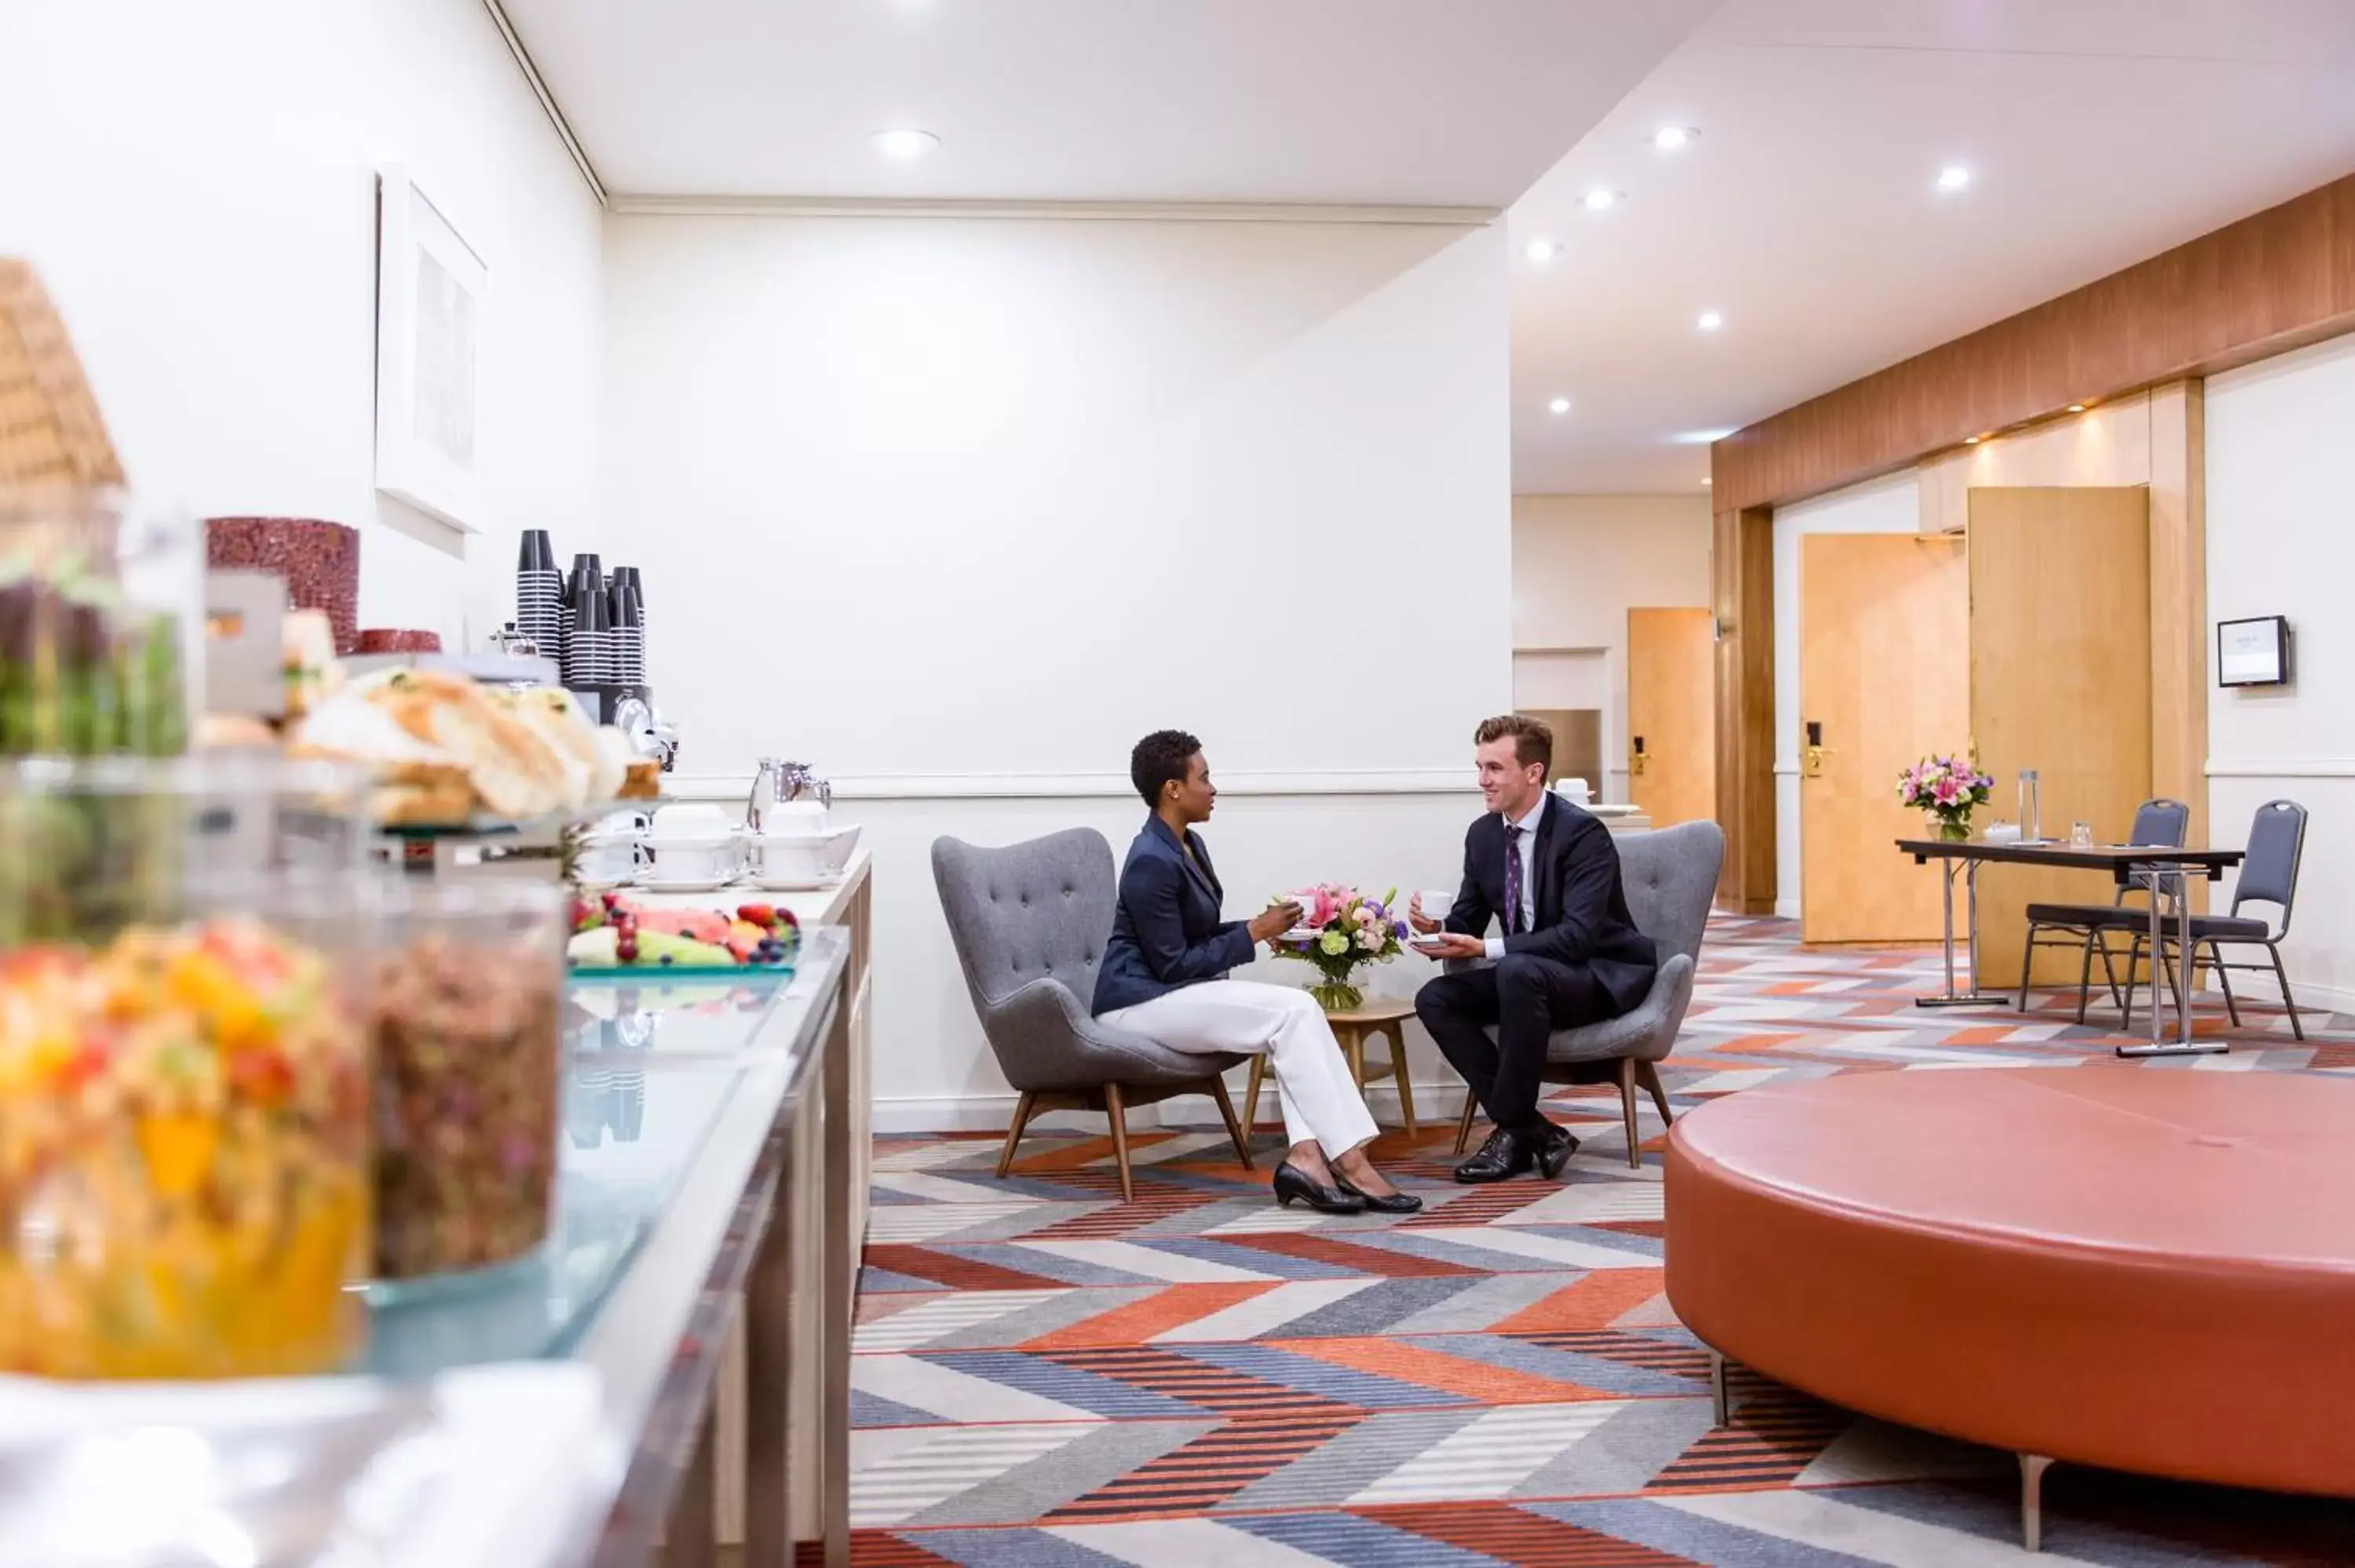 Area and facilities in Novotel Sydney Central